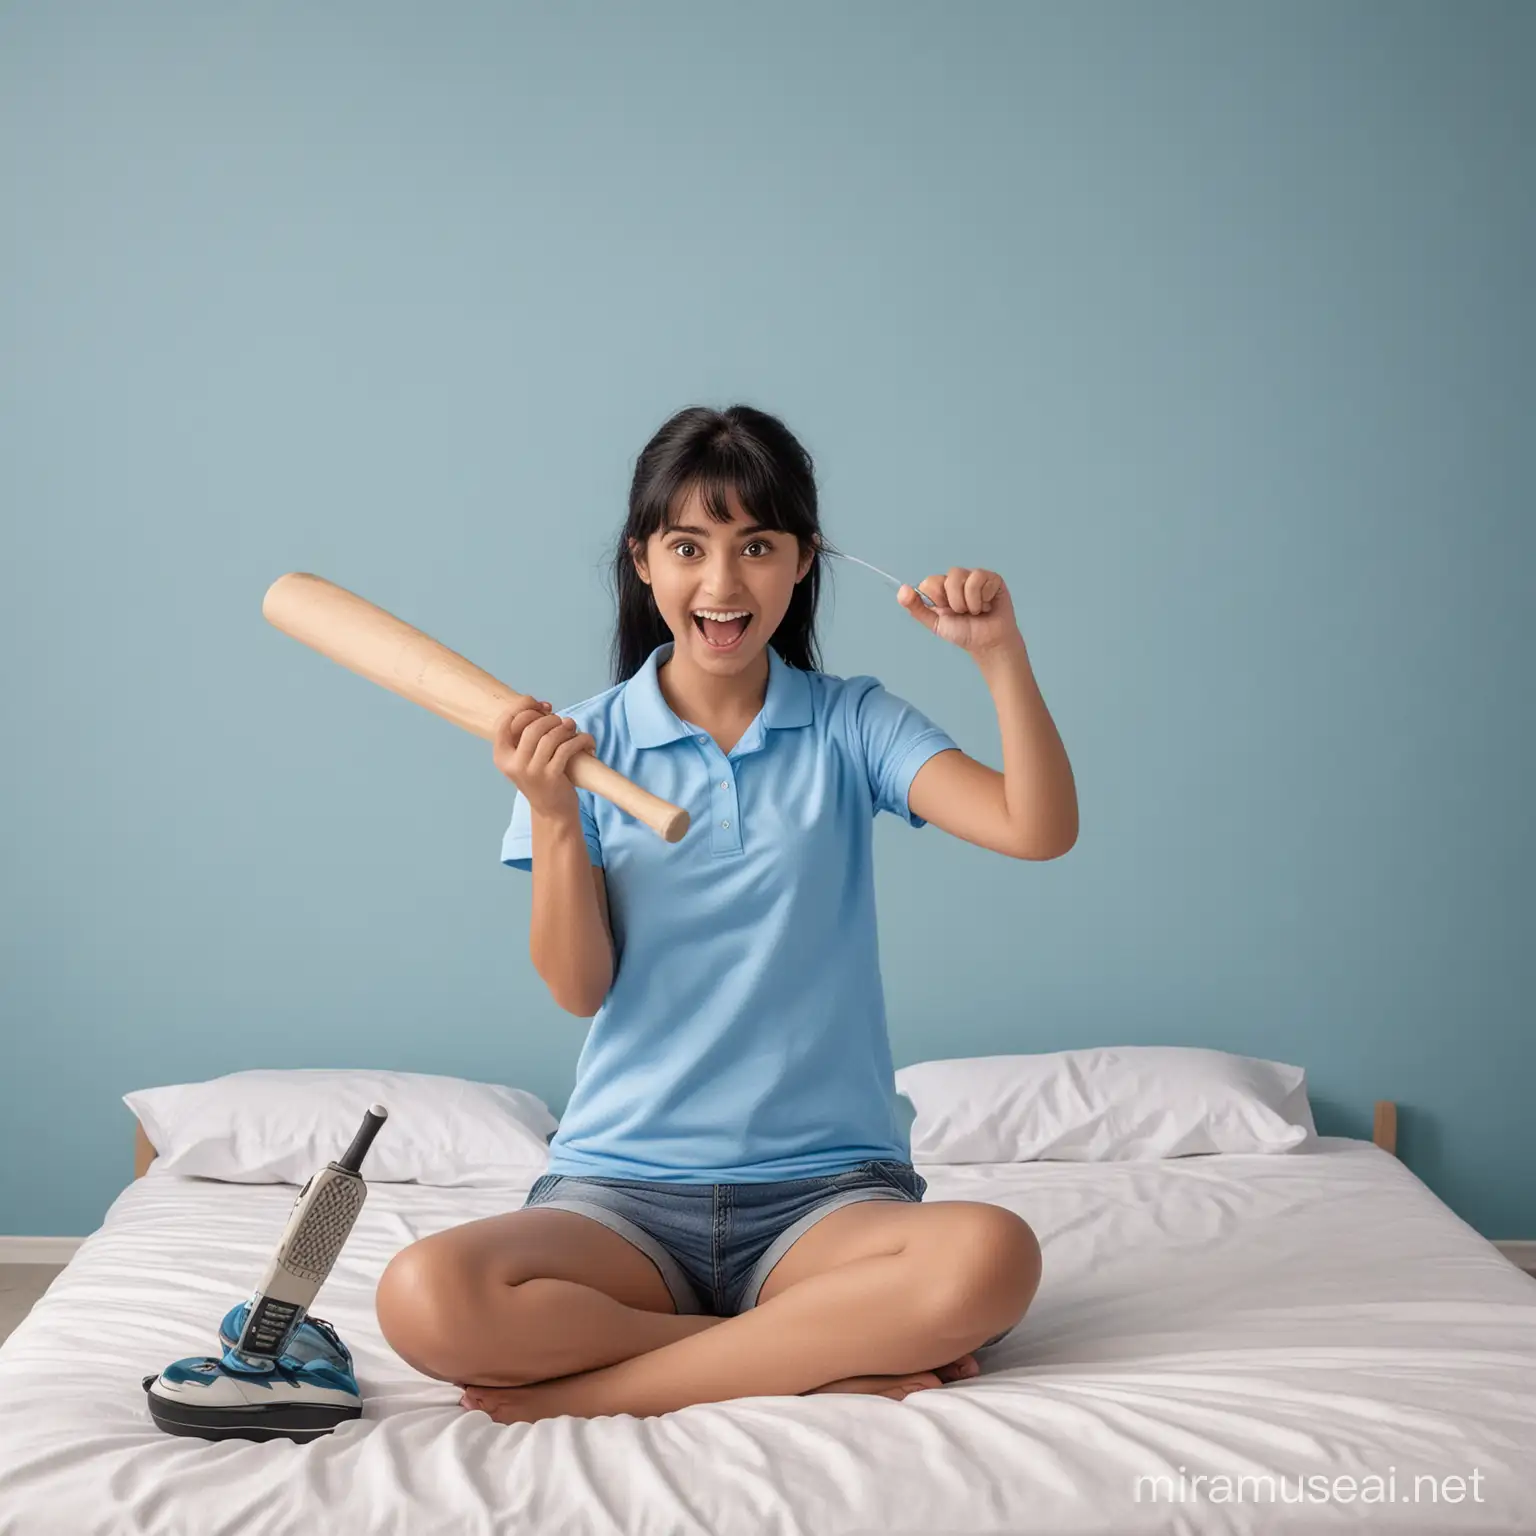 Excited Girl with Black Hair Watching TV and Holding Cricket Bat and Remote on Blue Mattress